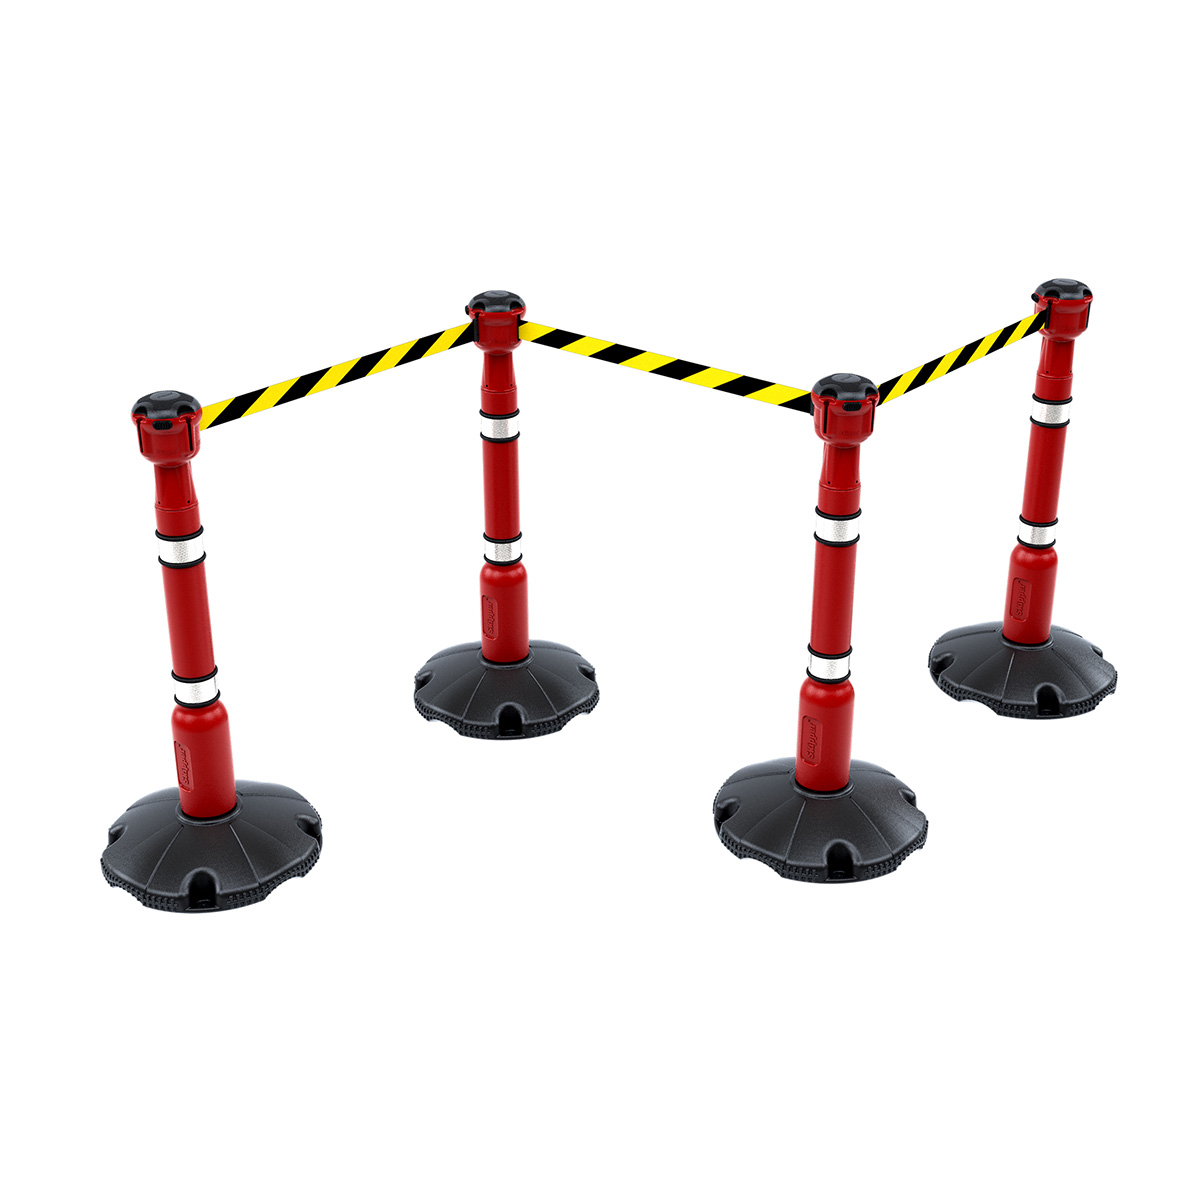 Skipper™ Portable Safety Barrier Kit 27m Ideal Event Crowd Control Management System